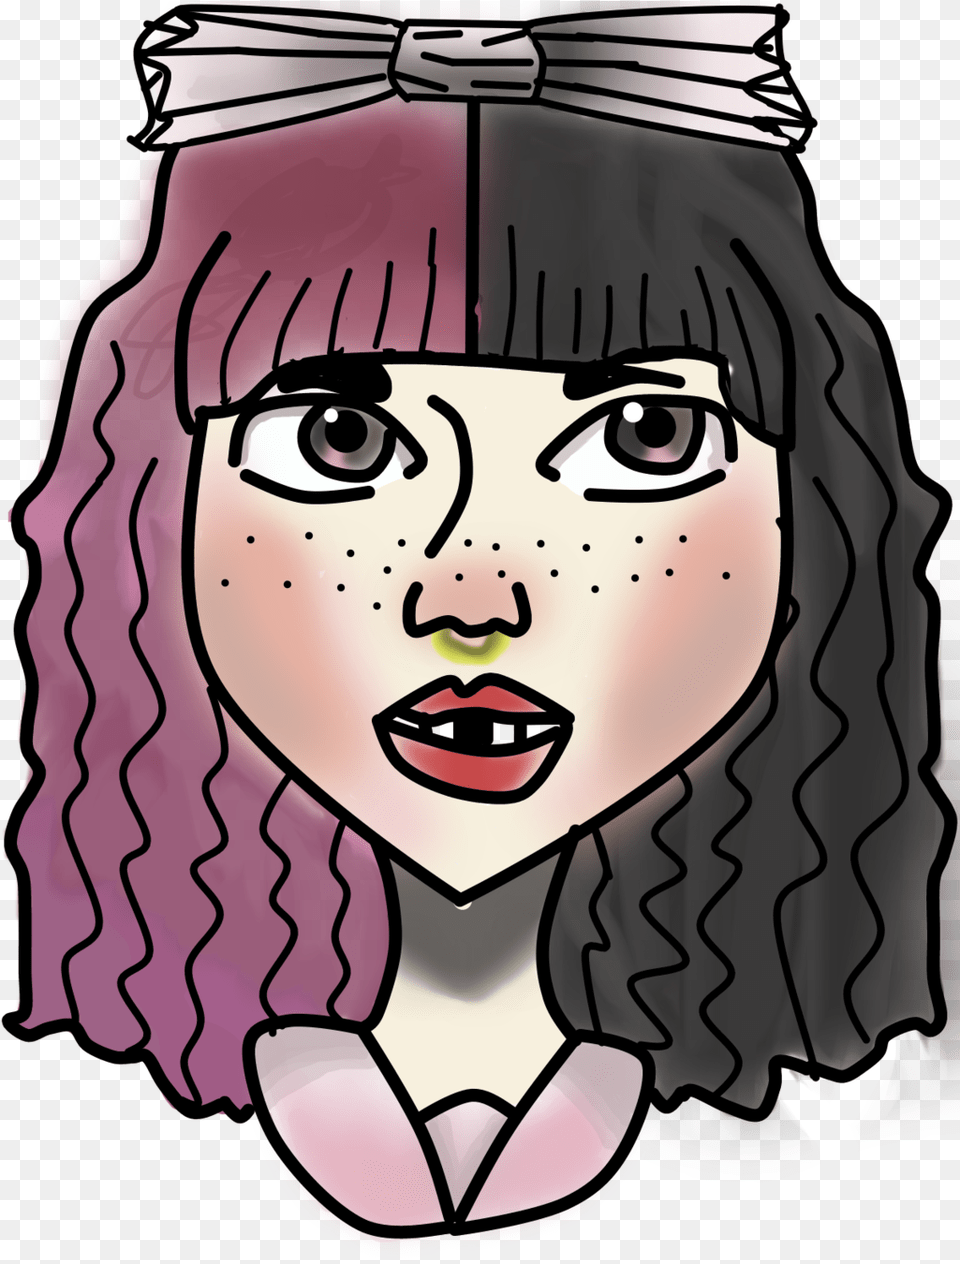 Melanie Martinez Complete Without Background By Omgitsec Portable Network Graphics, Publication, Book, Comics, Adult Free Transparent Png